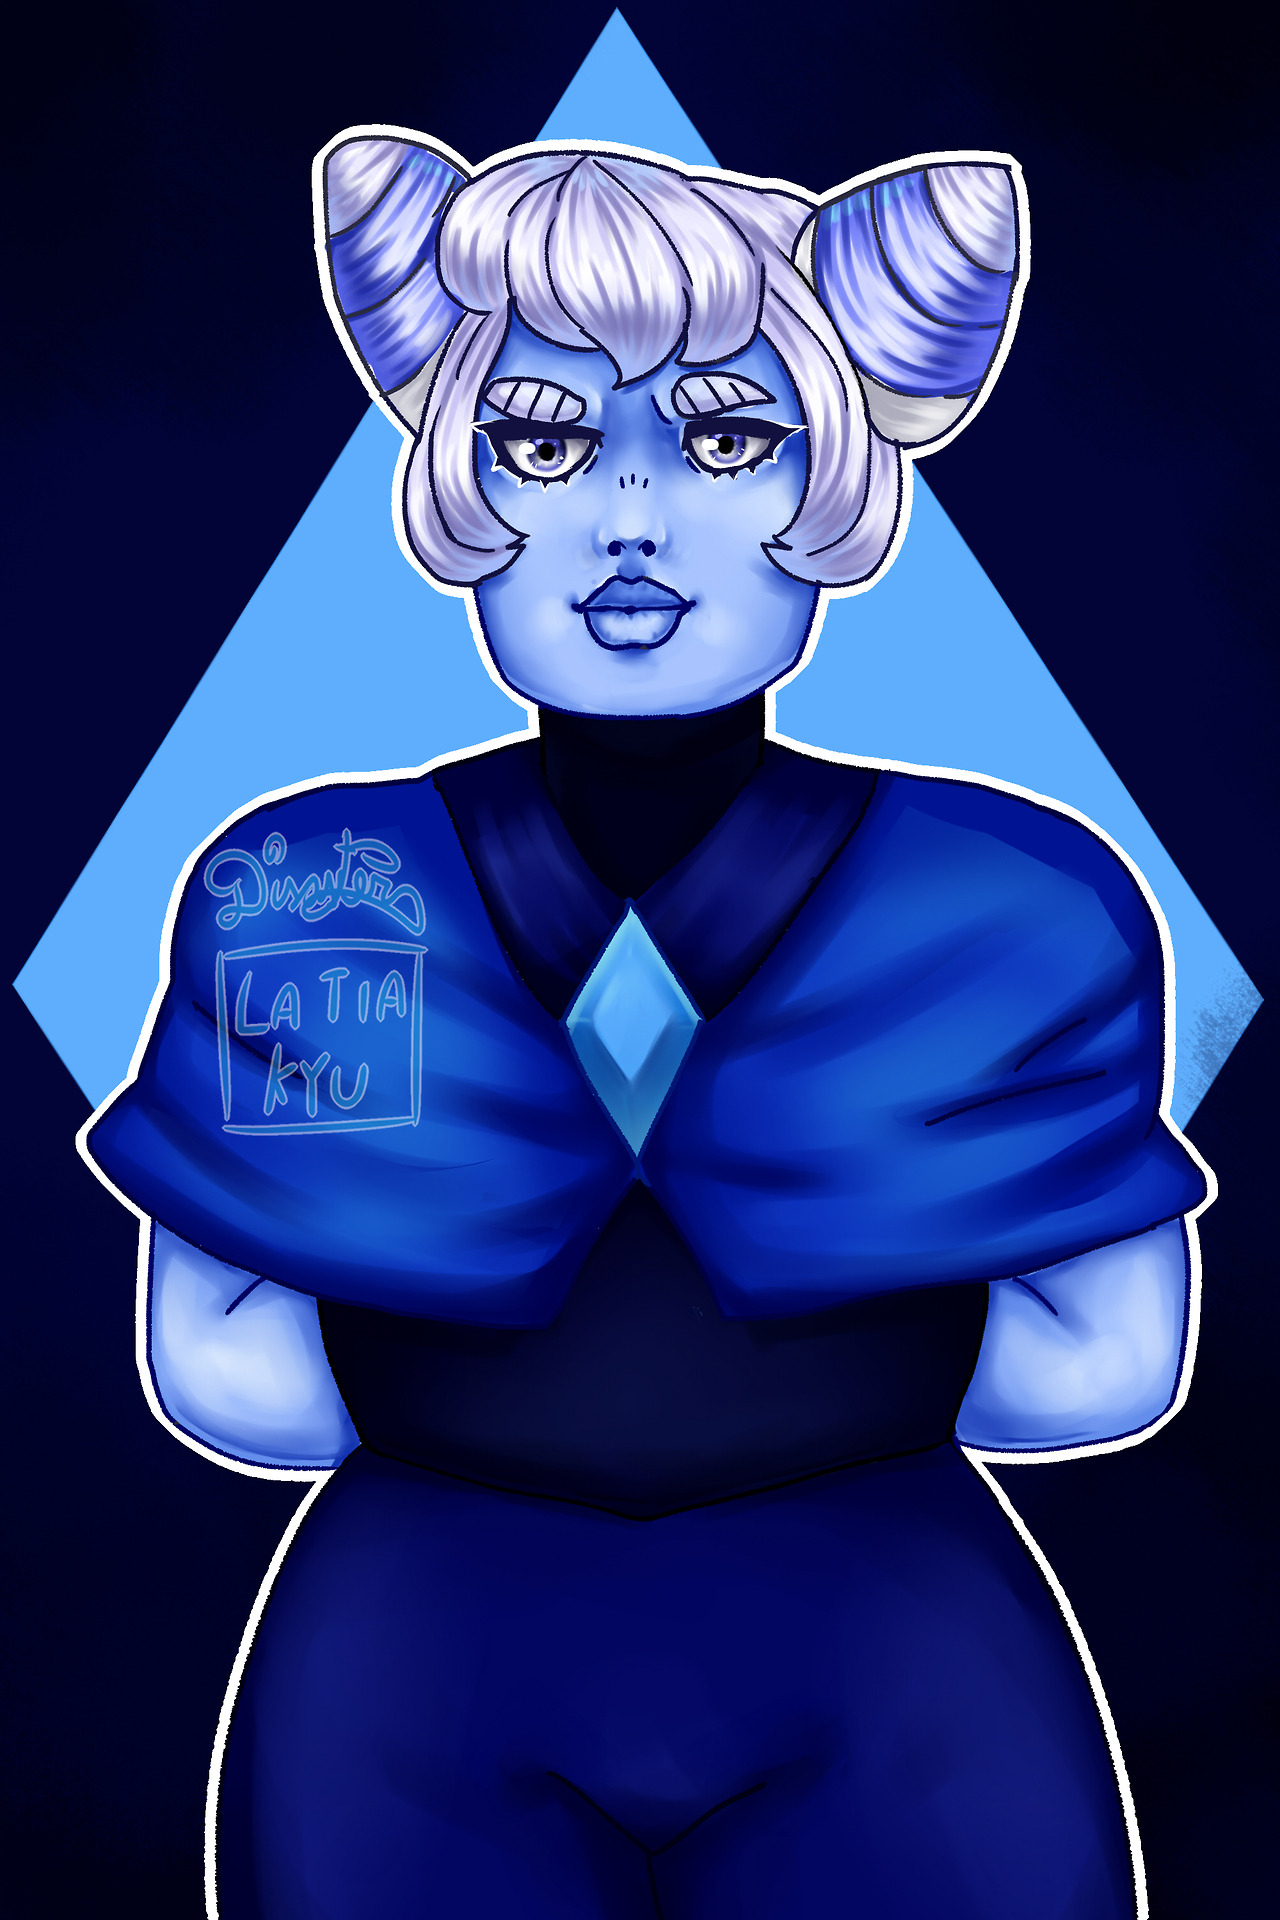 Collab with latiakyu (https://www.instagram.com/winter__rains/) Blue agate: lineart by kyu, color by me. Padparadscha: lineart by me, color by kyu.